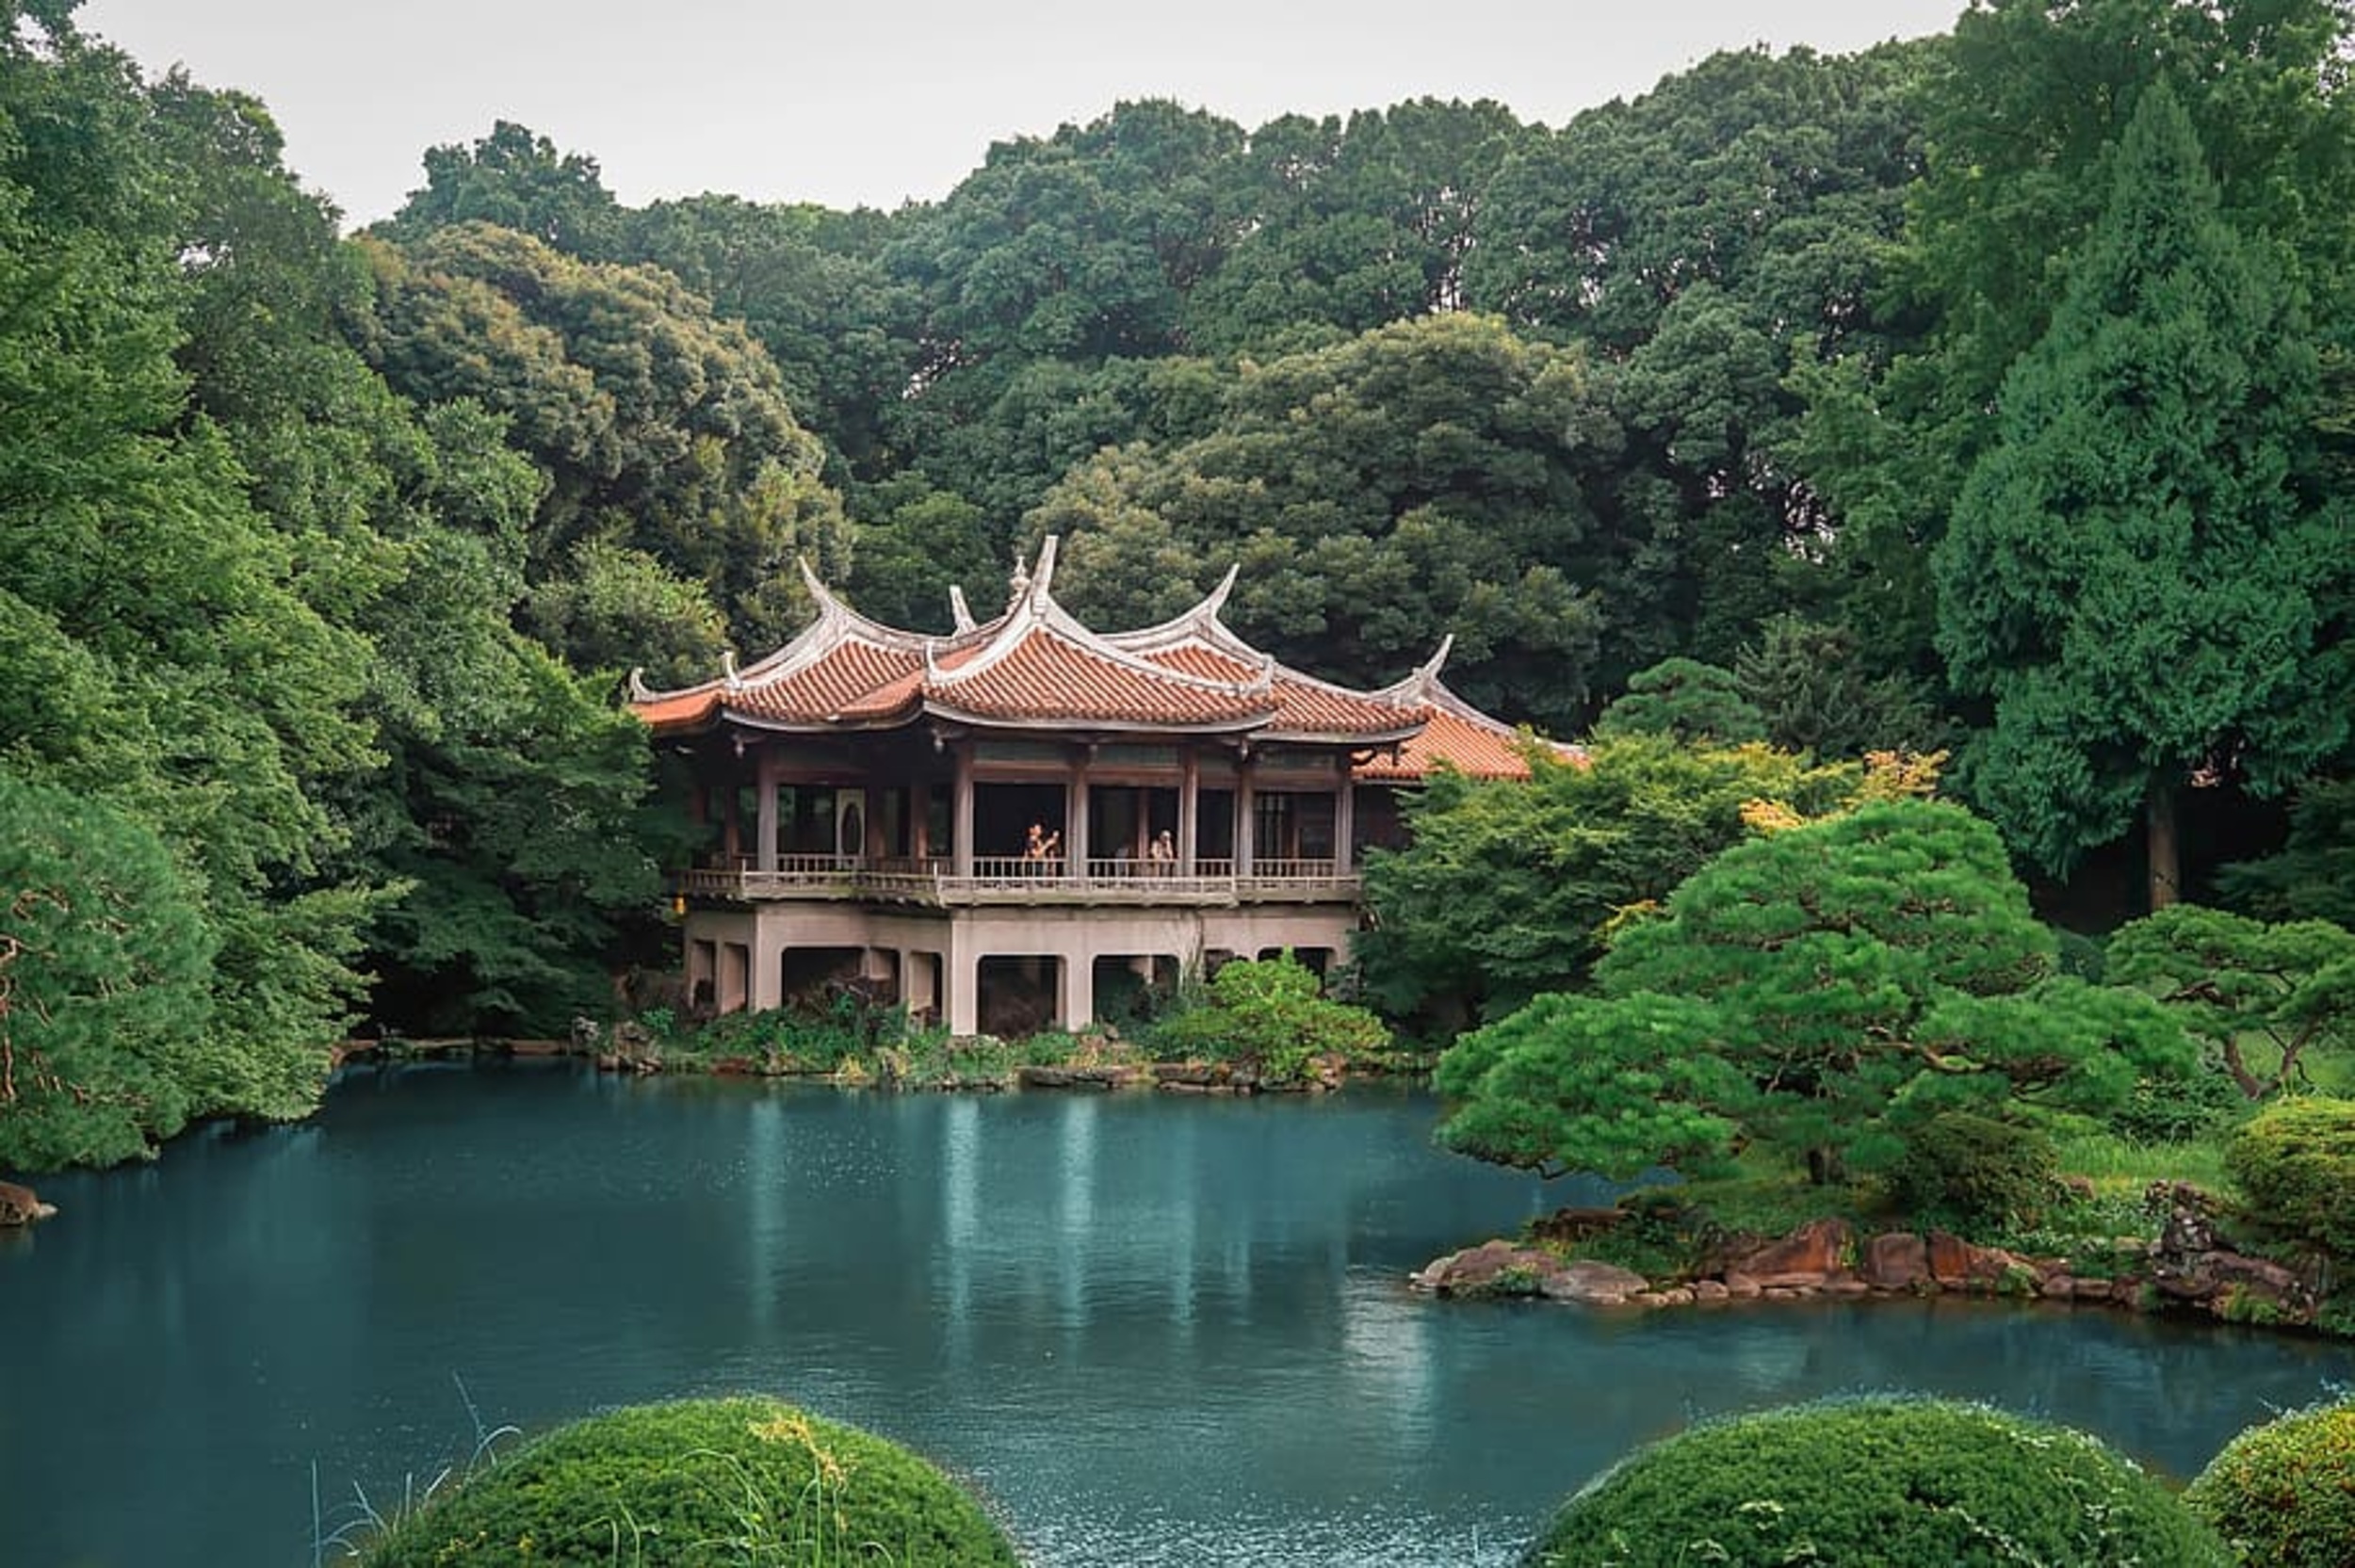 <p>Who doesn't enjoy a nice garden stroll? 145 acres of lush foliage, ponds and temples sounds pretty great to me. The temple resting on Shinjuku's pond, with red tiles shooting out like a dragon's breath, is simply a transcendent experience.</p><p>You may also like: <a href='https://www.yardbarker.com/lifestyle/articles/celebrate_st_patricks_day_with_these_20_irish_themed_recipes_031224/s1__37281975'>Celebrate St. Patrick’s Day with these 20 Irish-themed recipes</a></p>